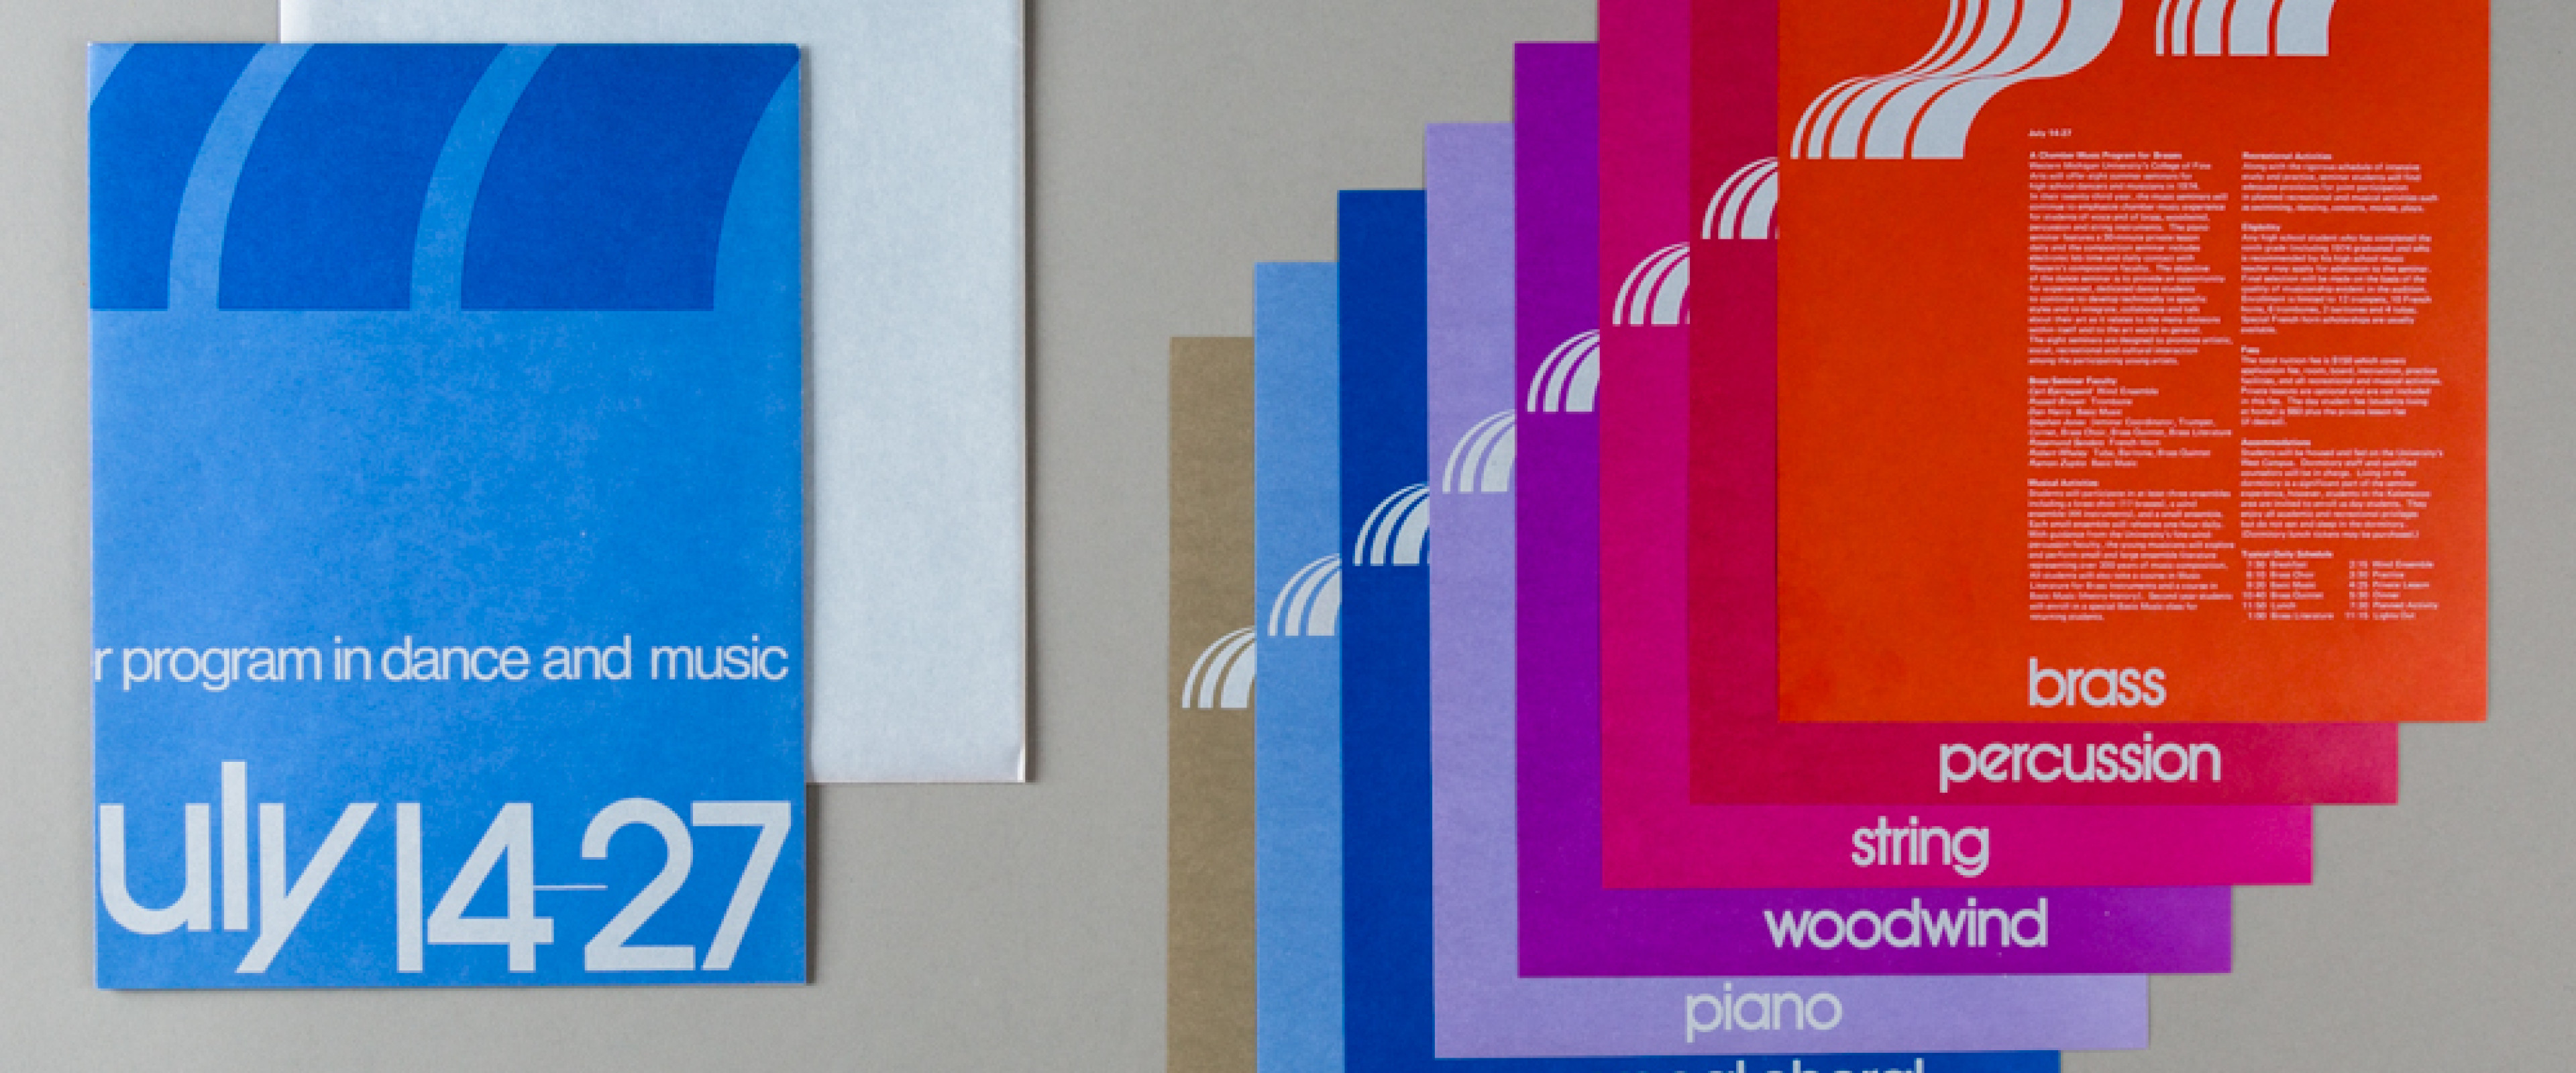 Promo materials for Seminar in the 70s, designed in the Design Center. Papers of different colors highlighting different sections to join.